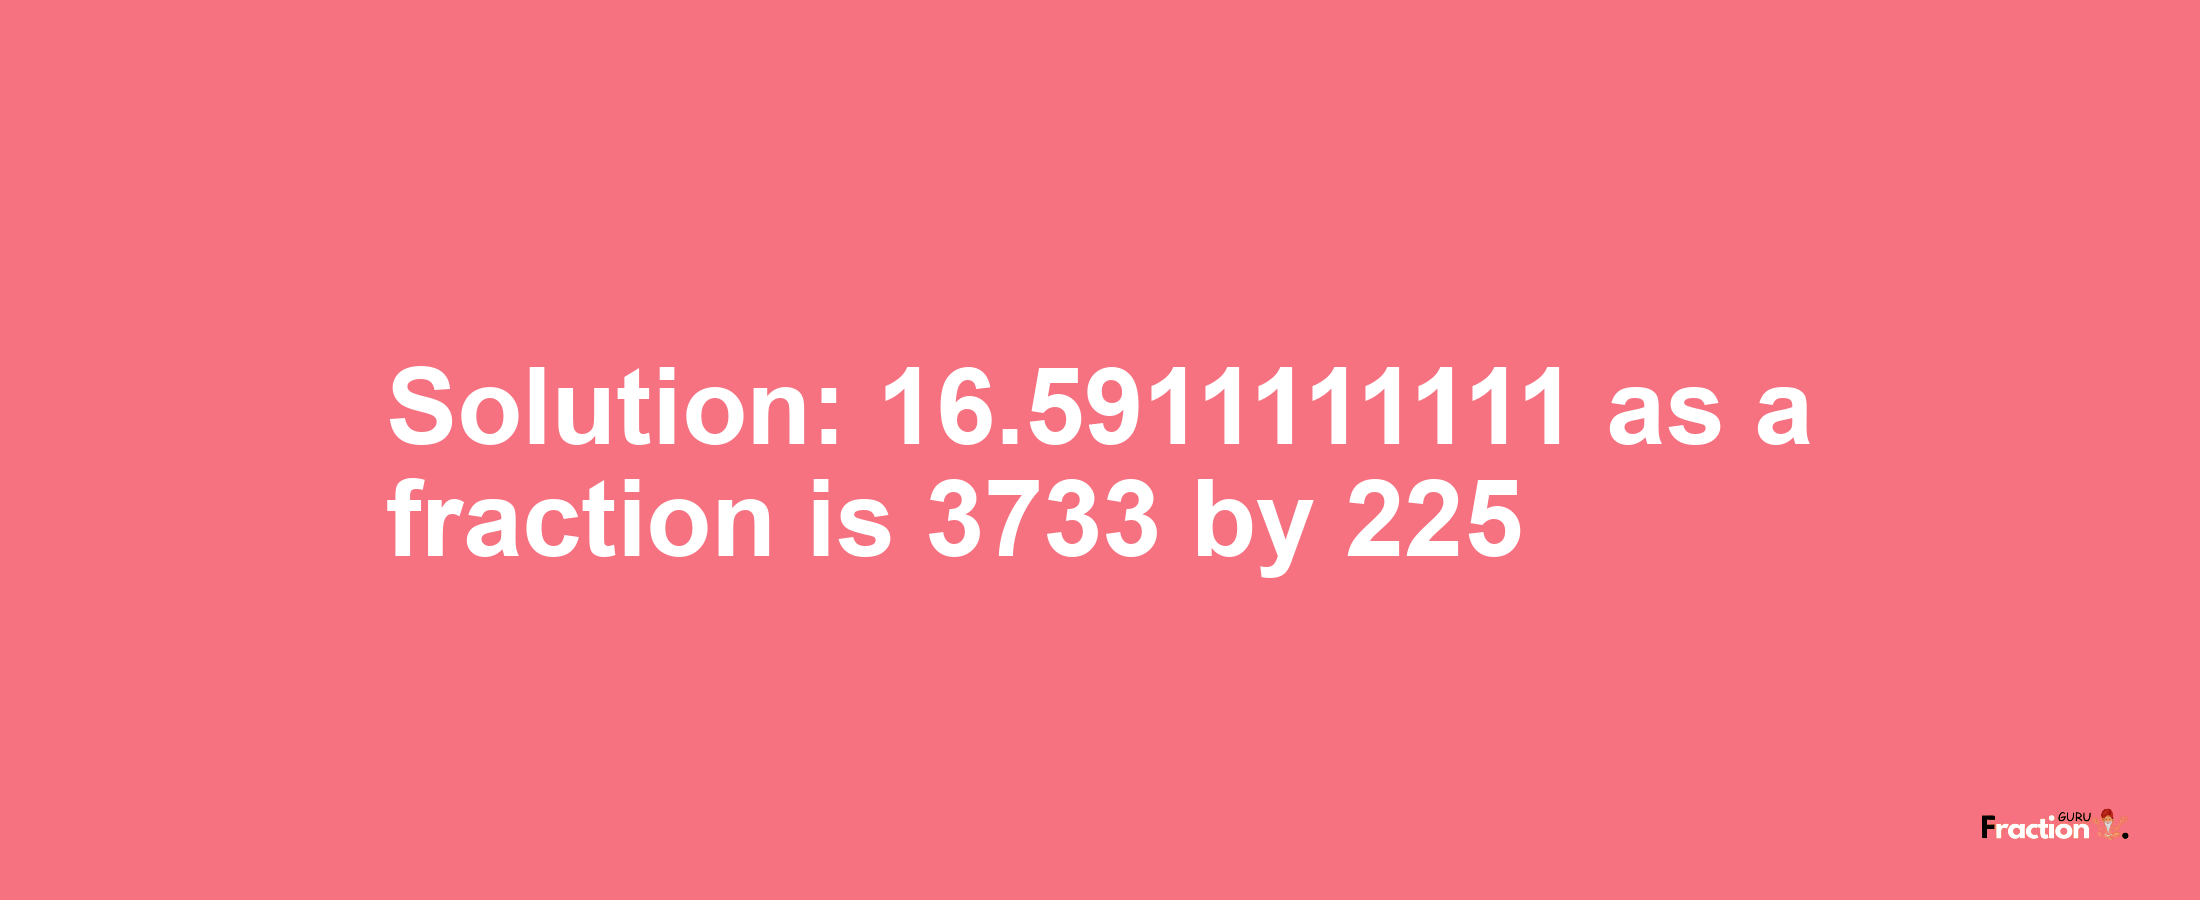 Solution:16.5911111111 as a fraction is 3733/225